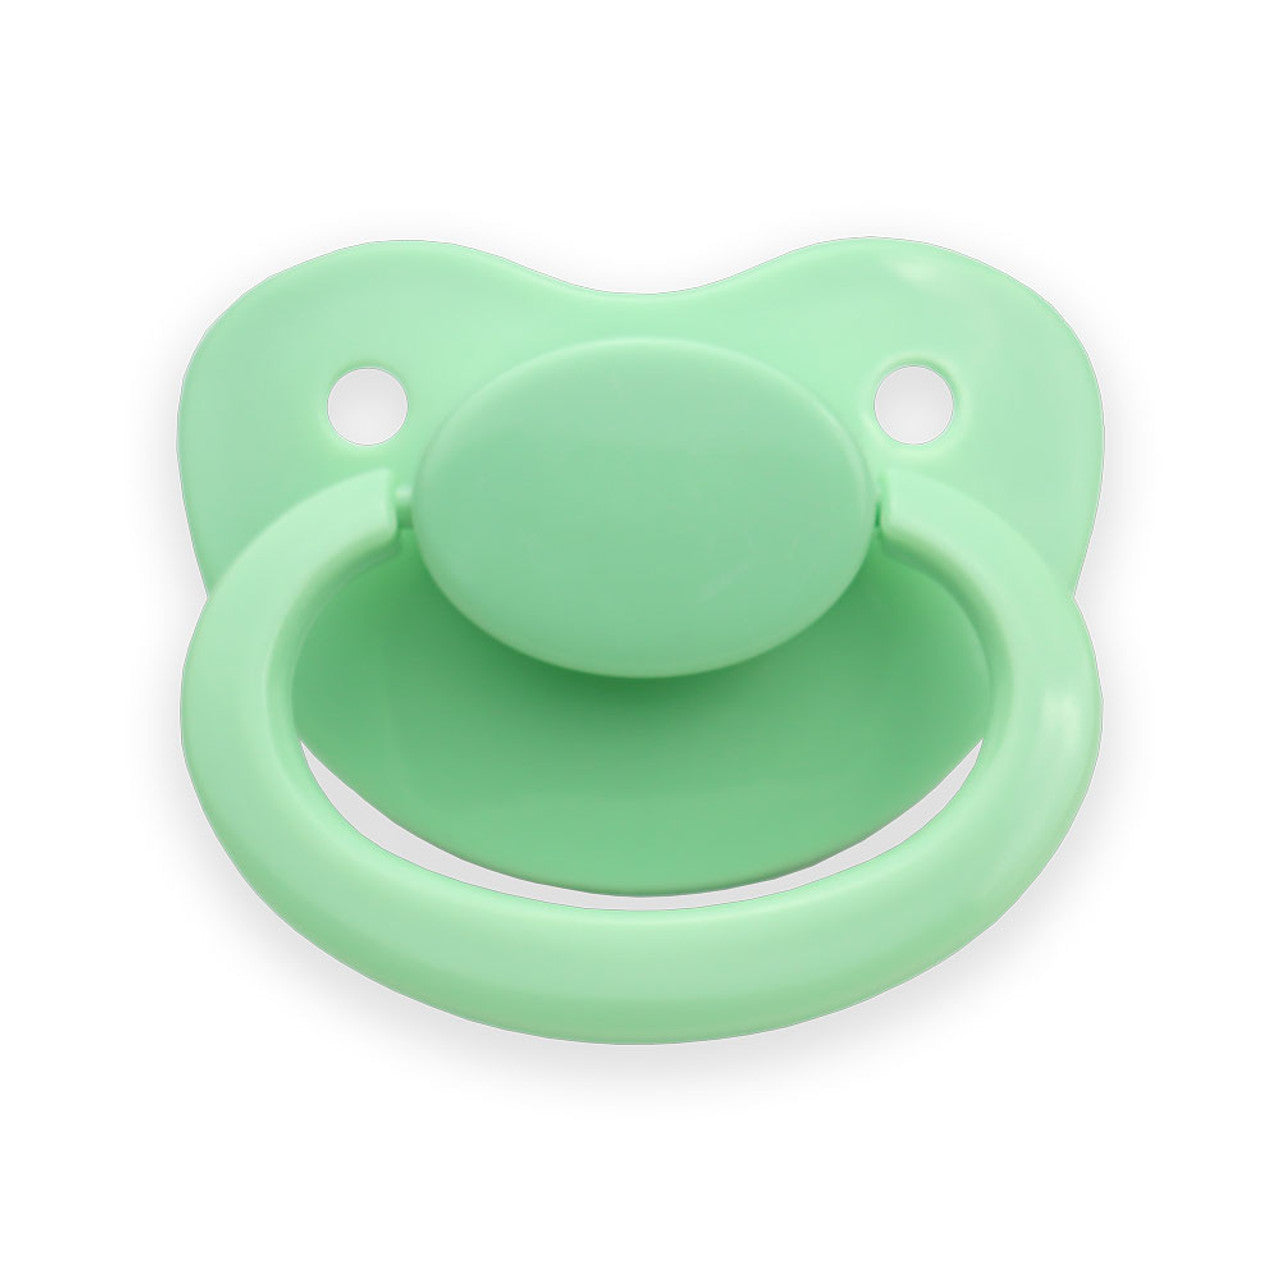 Adult Size 6 Pacifier Mint green